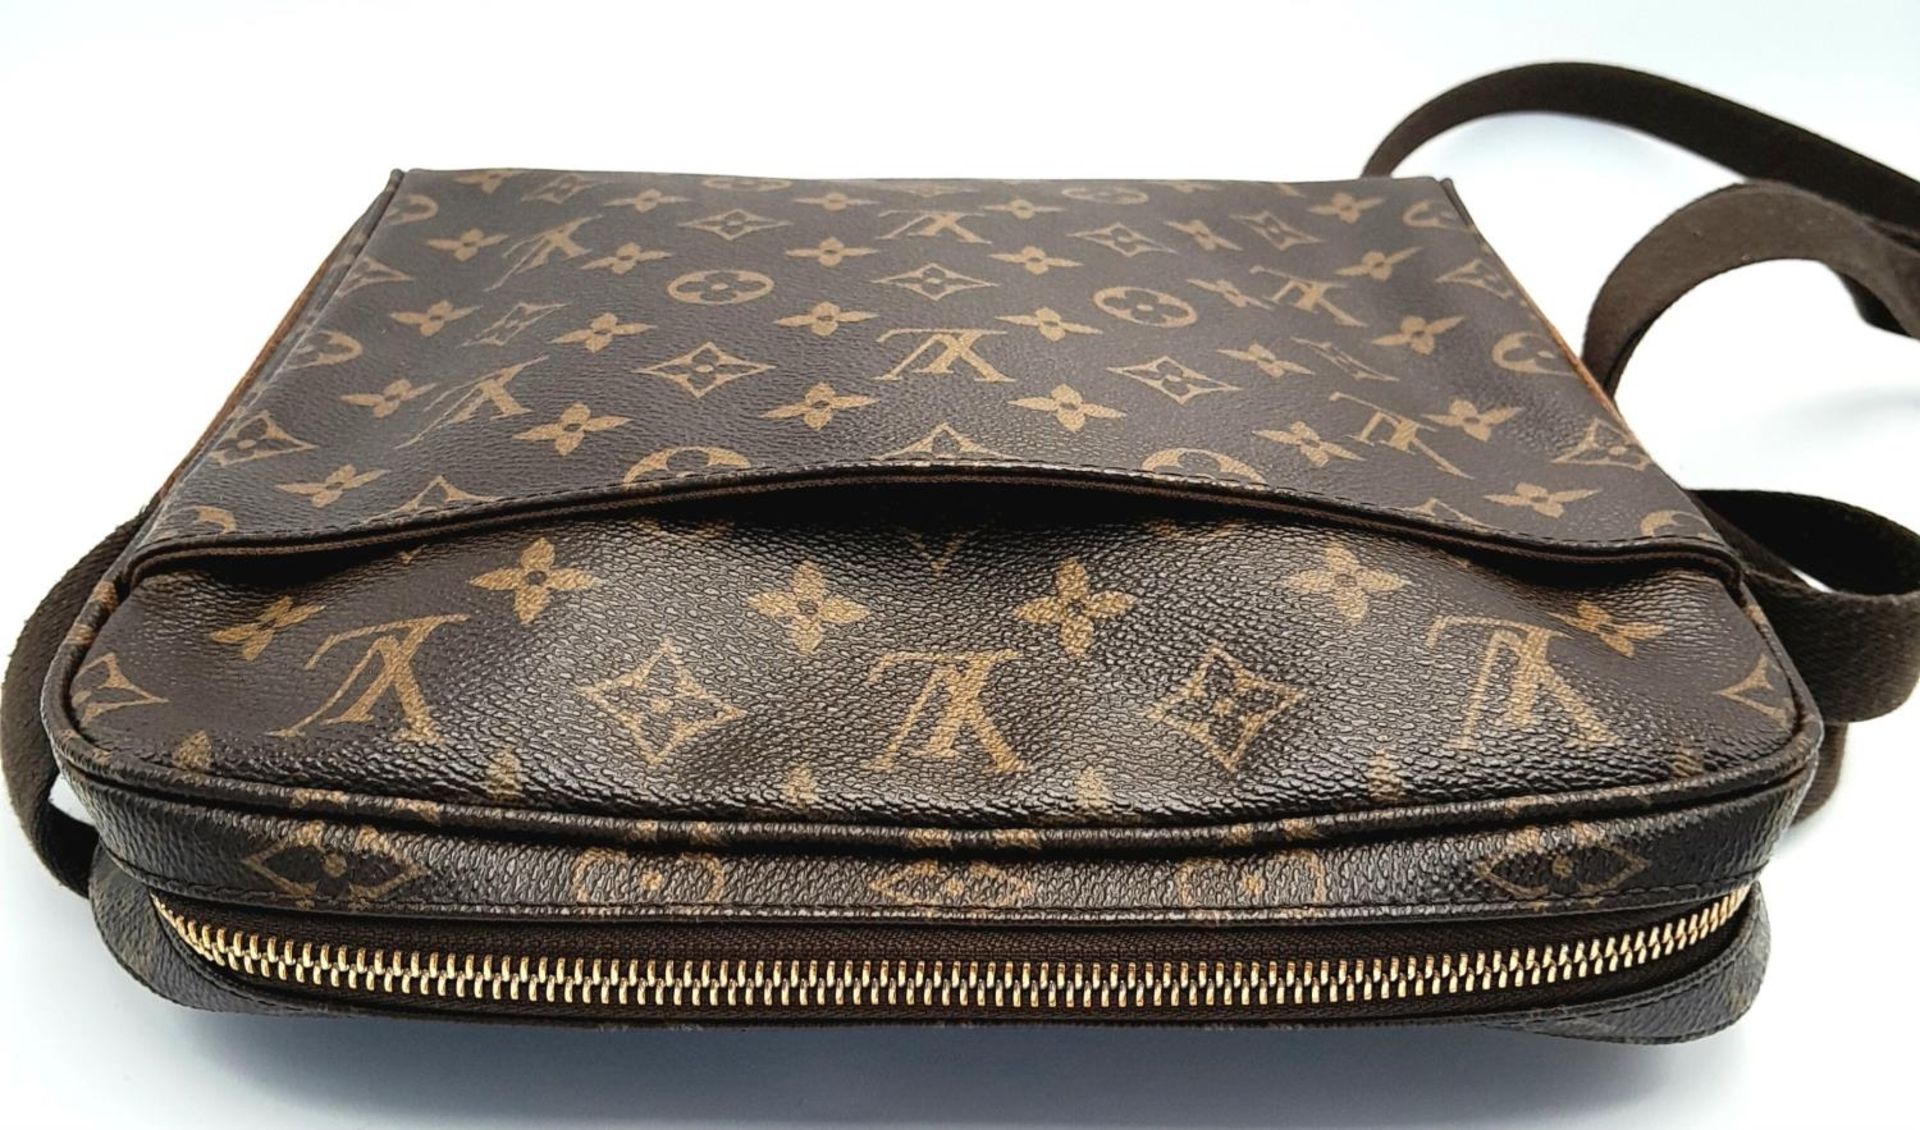 A Louis Vuitton Trotteur Beaubourg Satchel Bag. Monogramed canvas exterior with gold-toned hardware, - Image 3 of 9